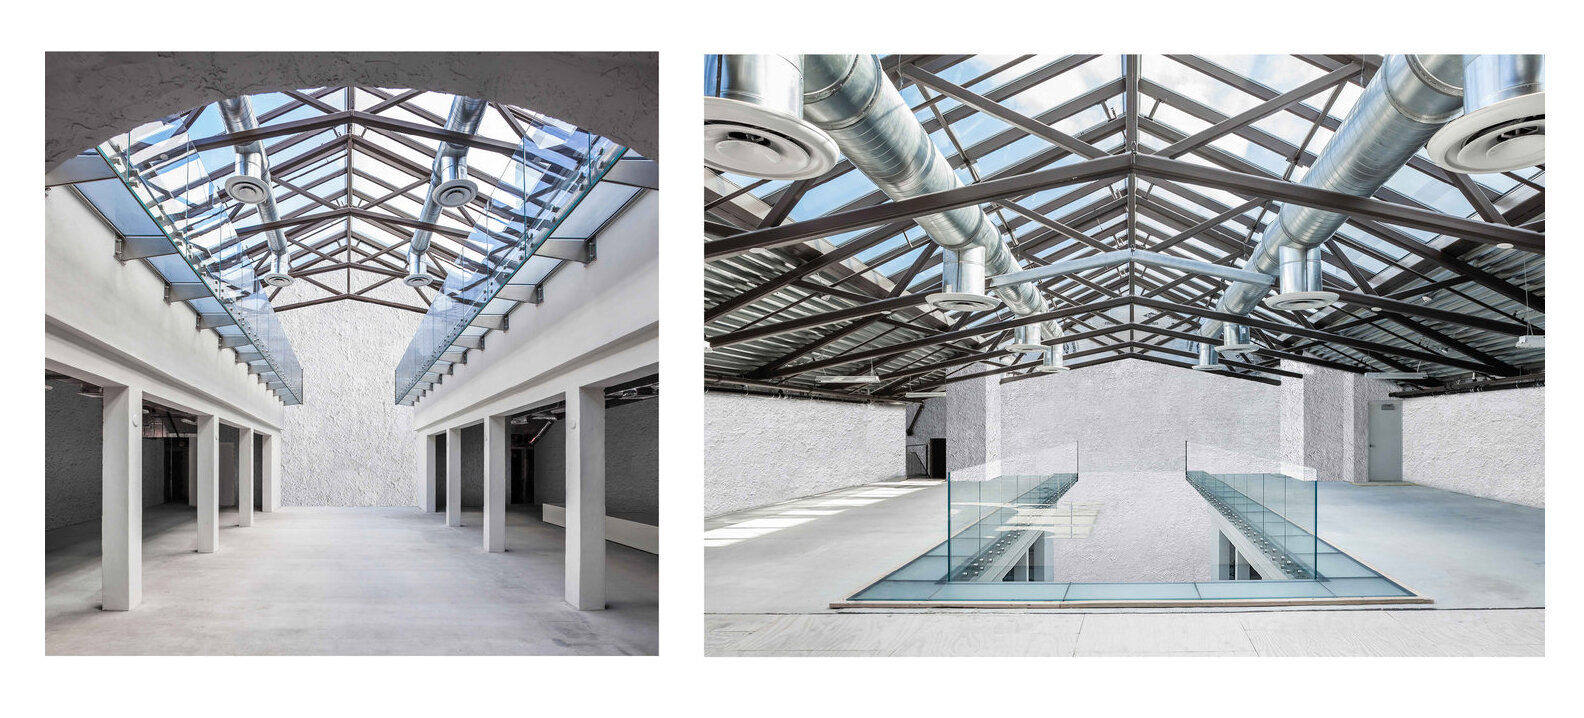  Installed over the historic patio,  the skylight structure spans the   the entire width of the building’s 50-foot lot.  